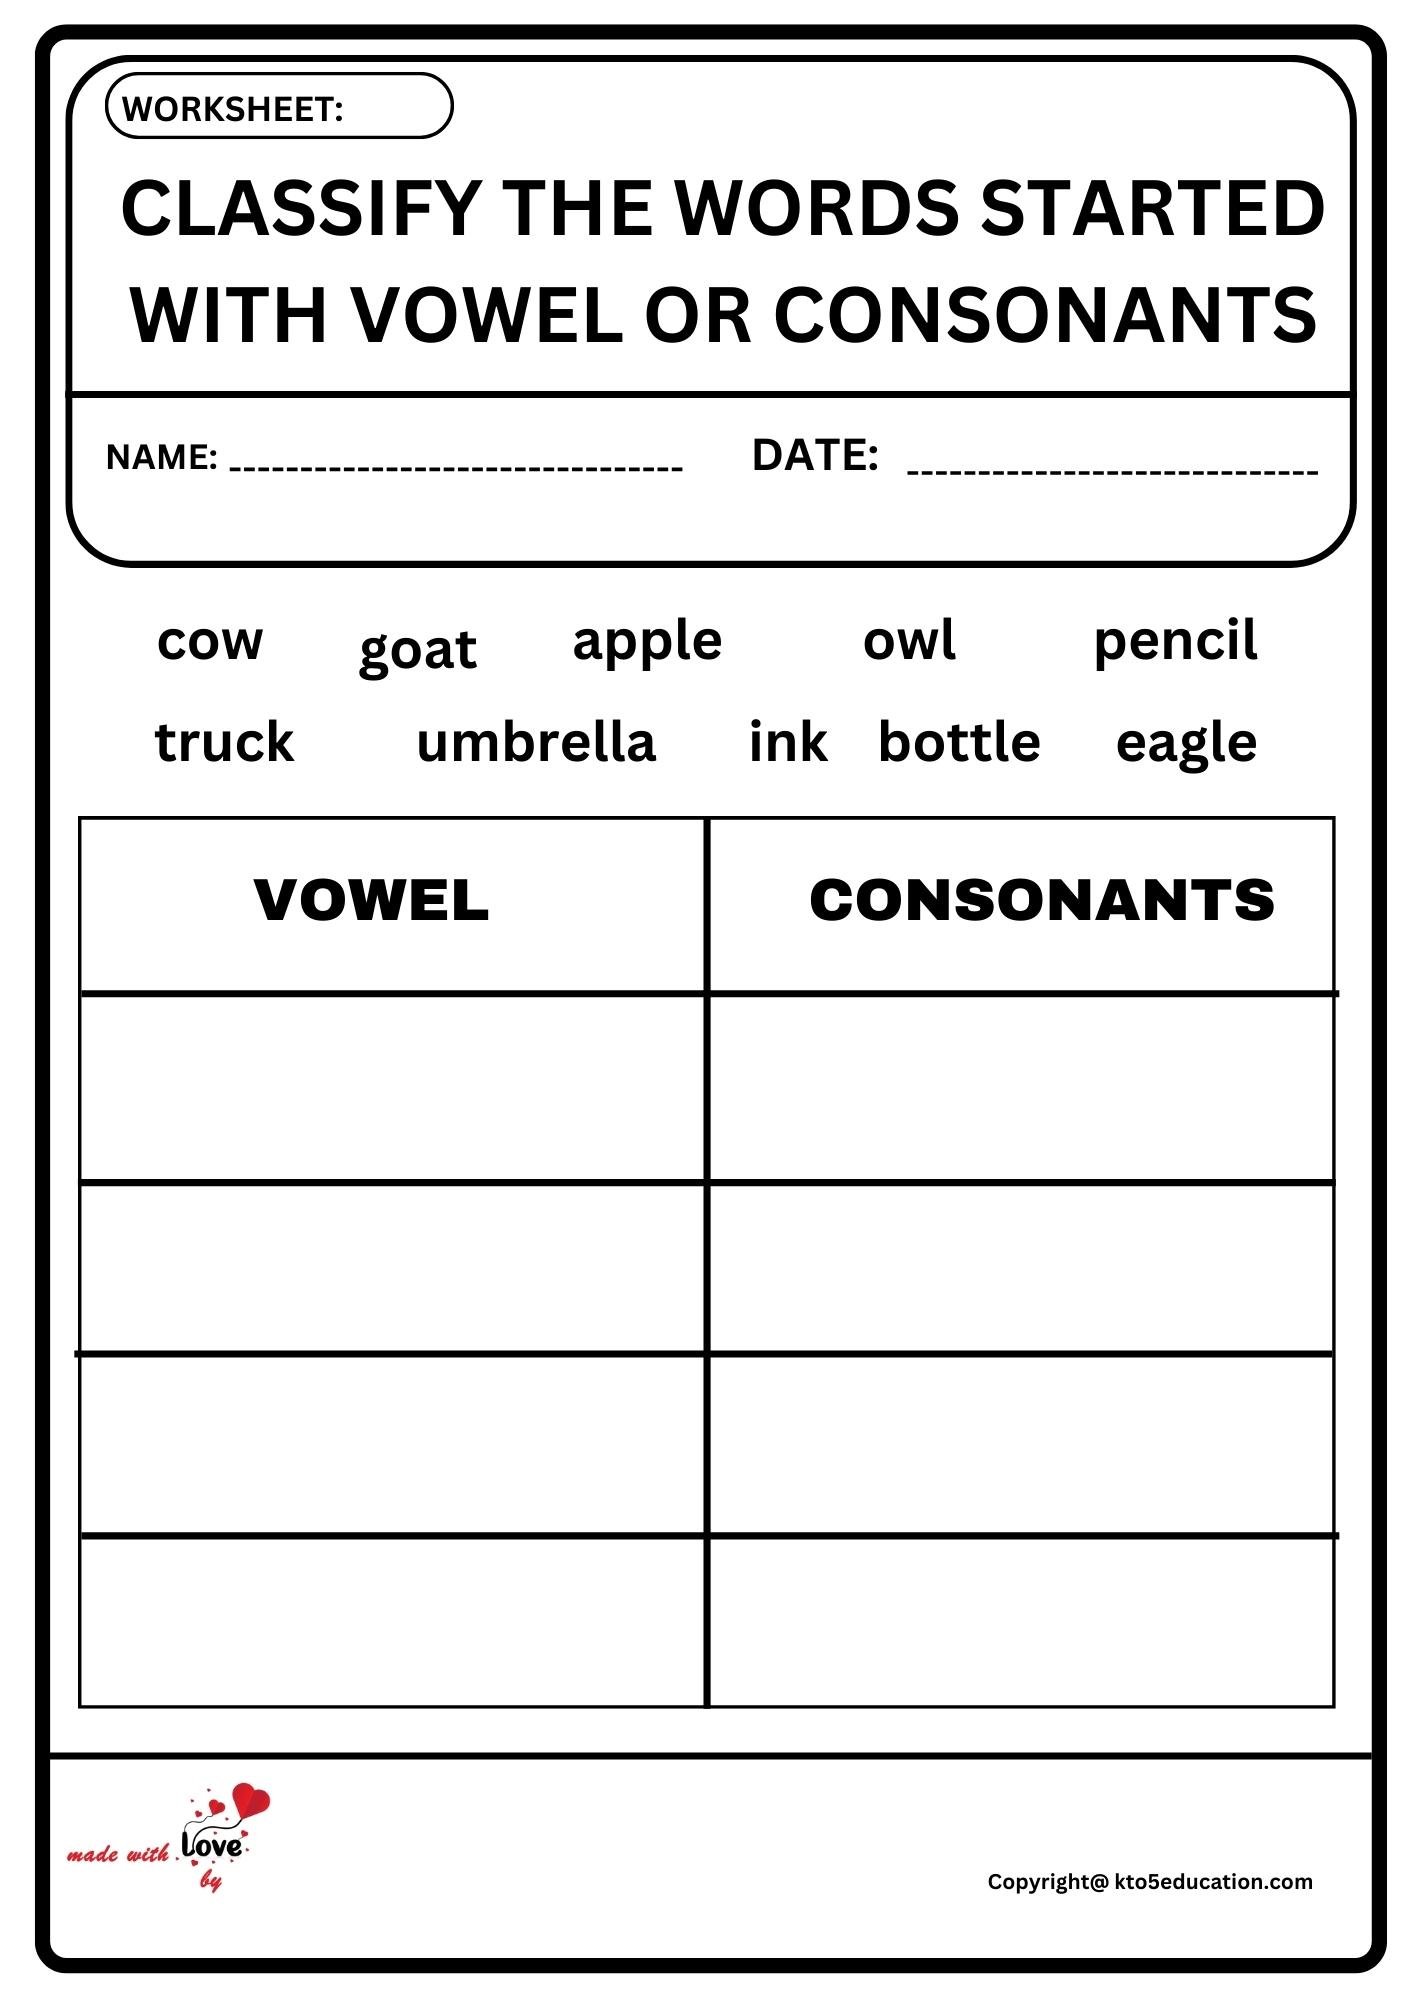 Classify The Words Started With Vowel Or Consonants Worksheet 2